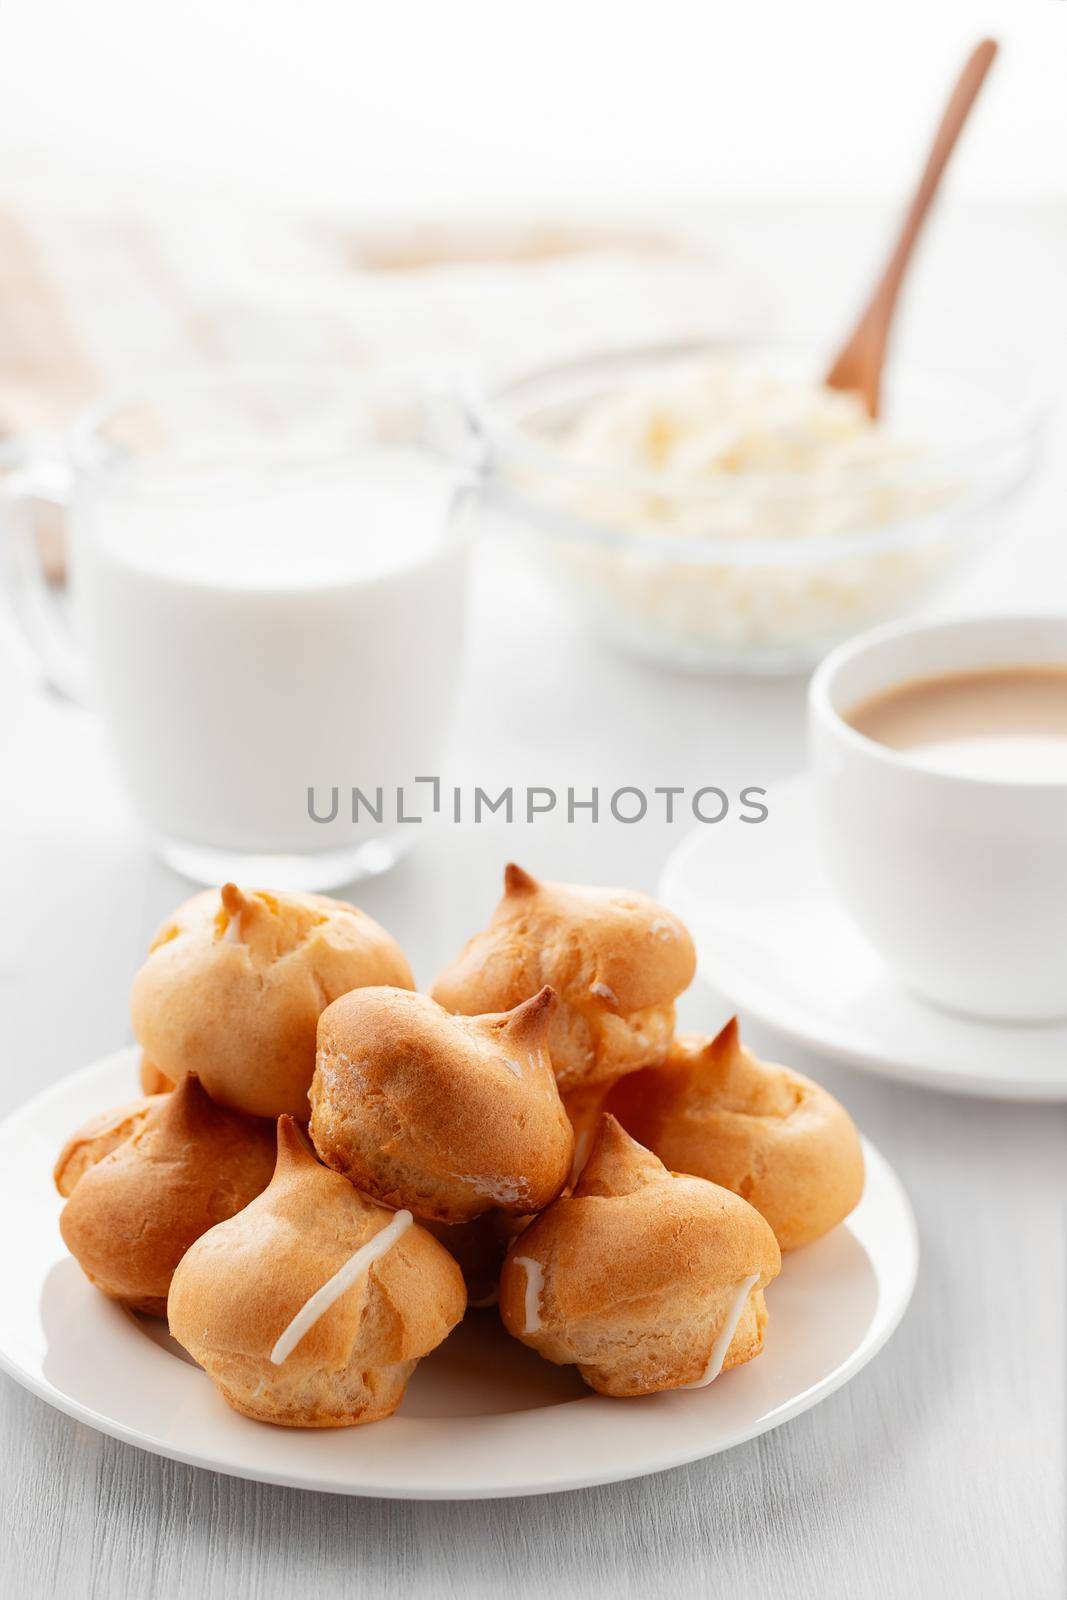 Morning coffee with cakes. Profiteroles, coffee, cream, cottage cheese on a white wooden table. Vertical image.